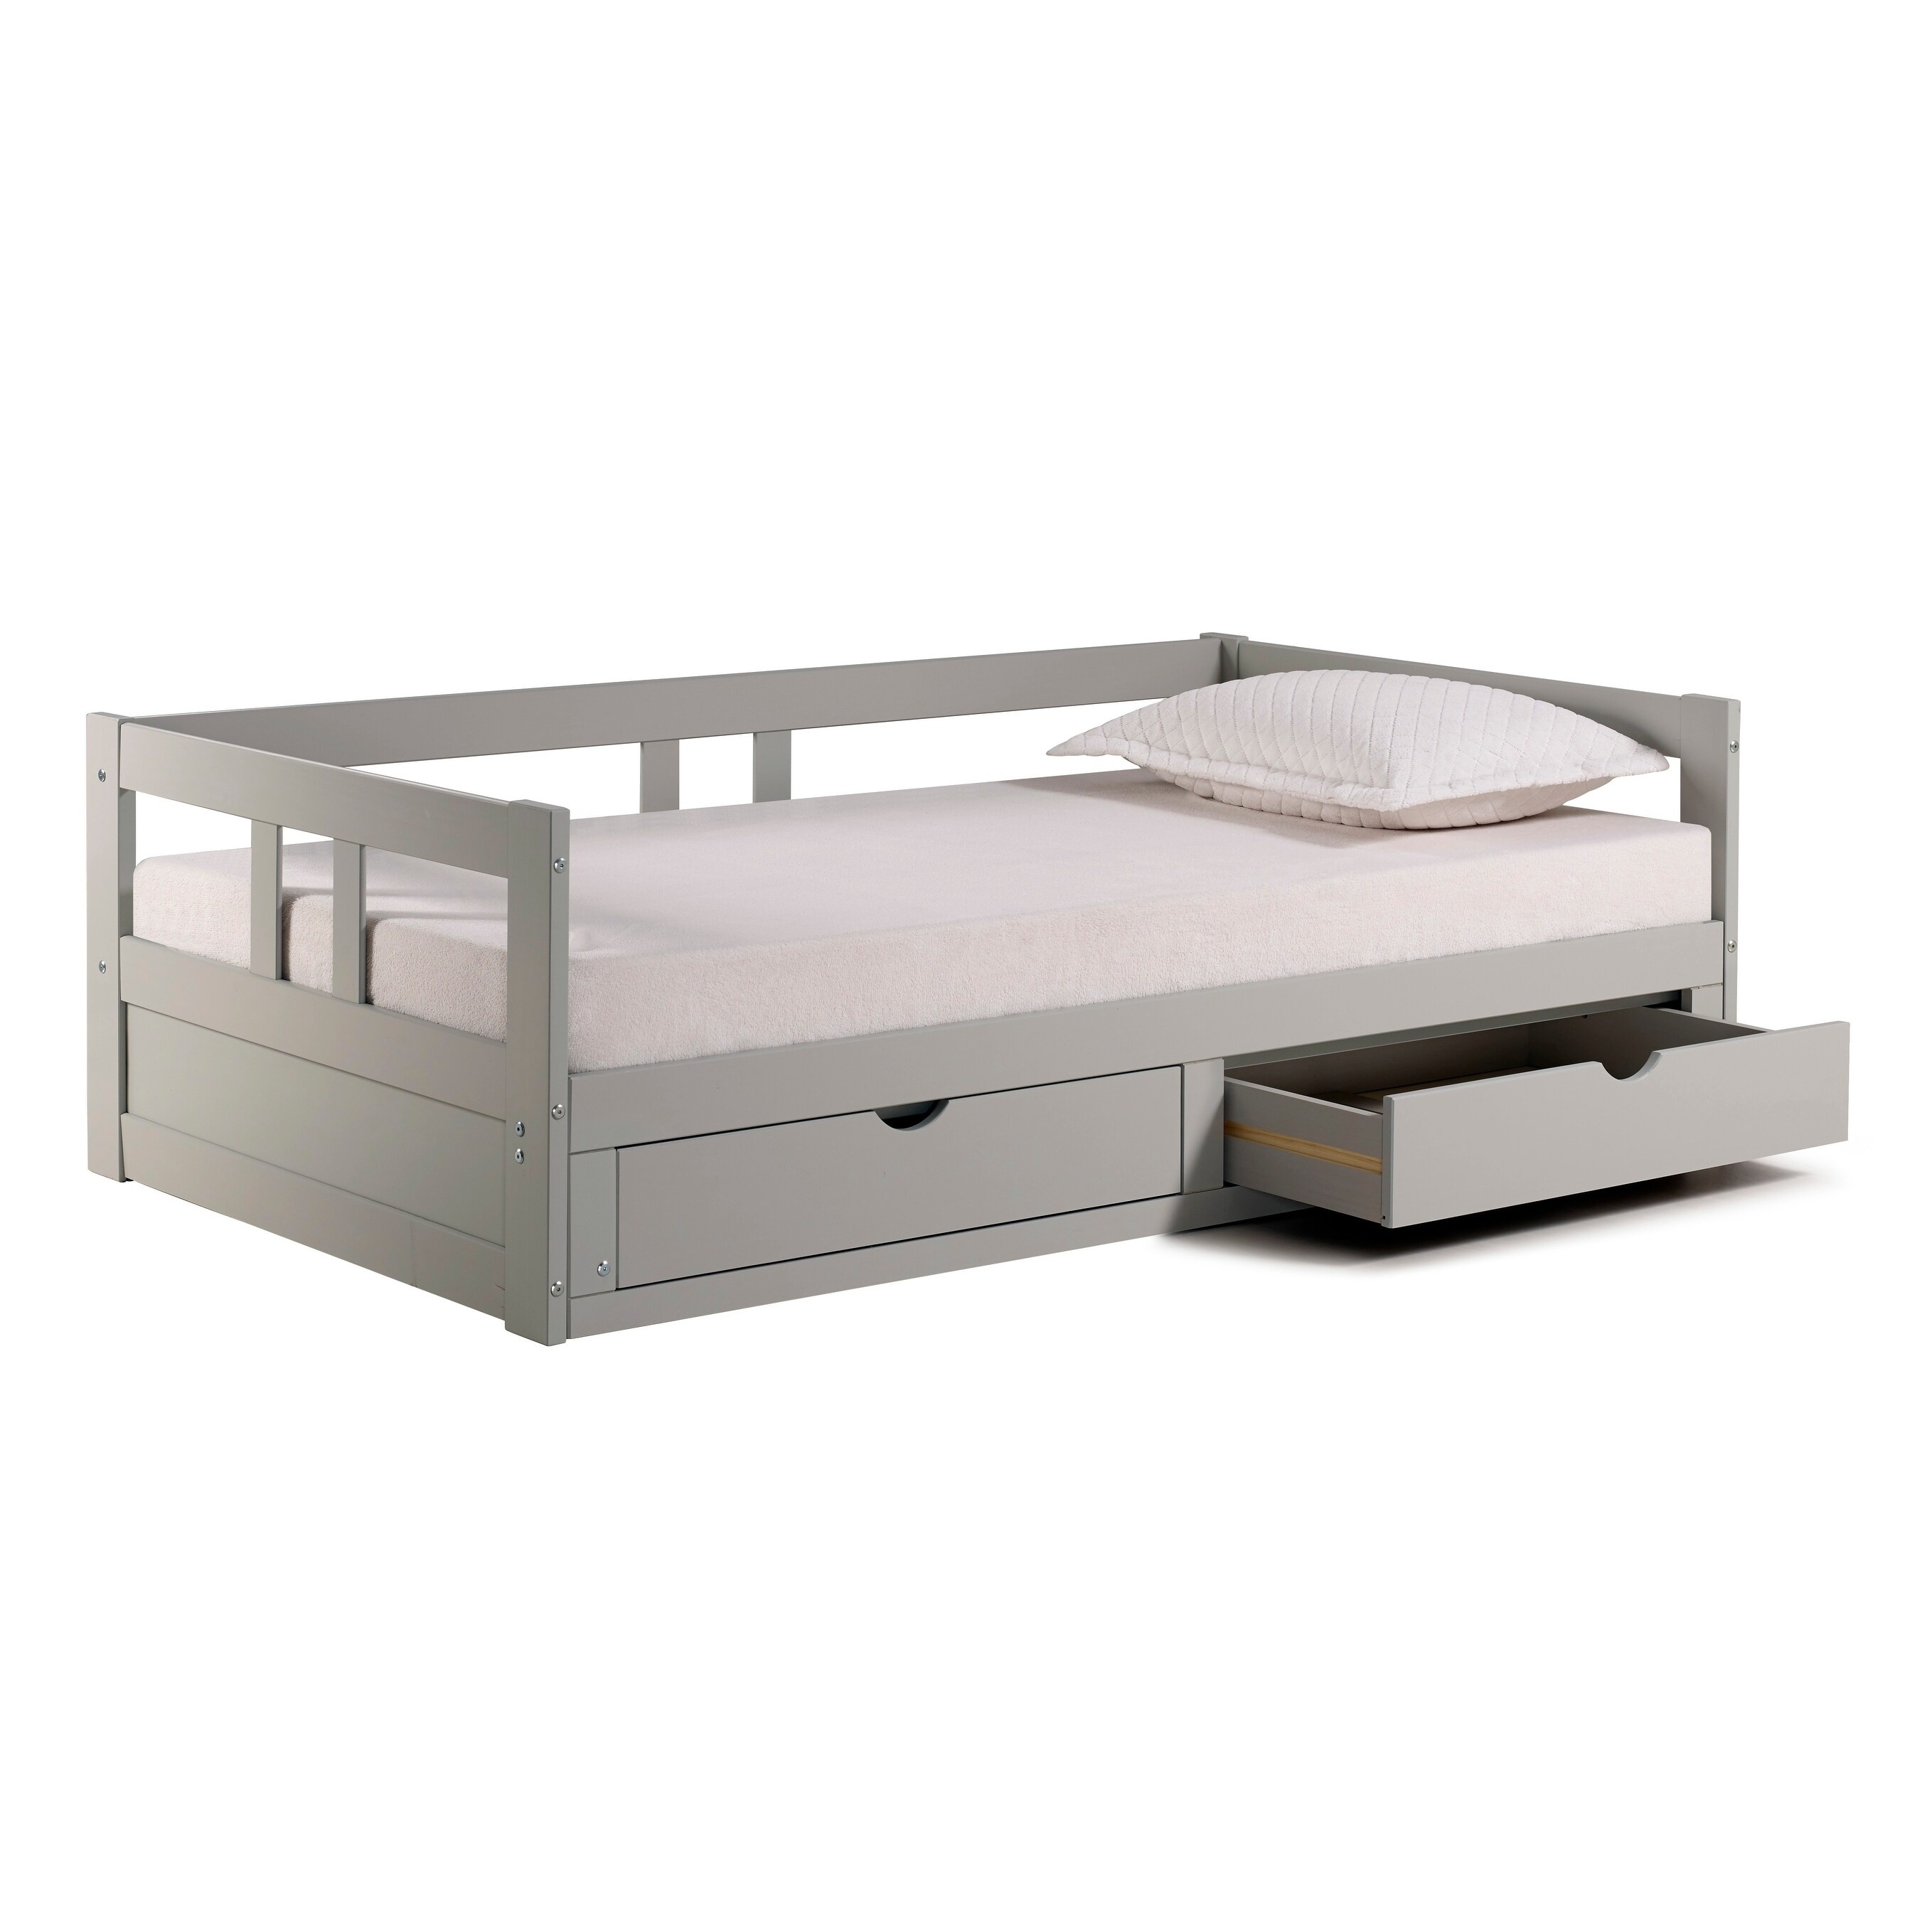 https://ak1.ostkcdn.com/images/products/is/images/direct/97f725c6b5f27380ed57d8daffdcbc4684ec7d62/Melody-Expandable-Twin-to-King-Trundle-Daybed-with-Storage-Drawers.jpg